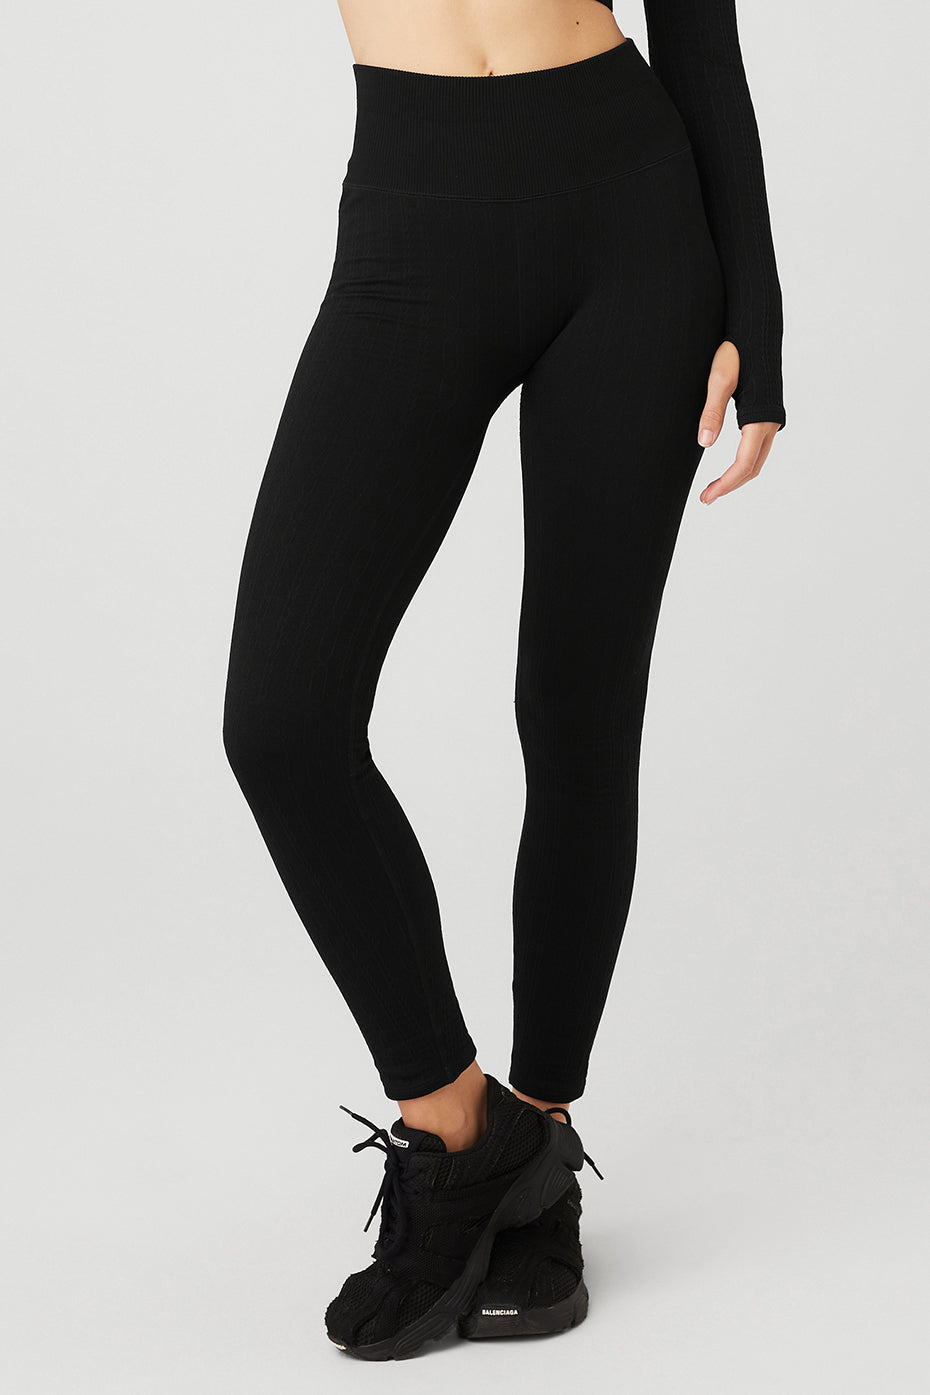 MAXXIM Ribbed Workout Leggings for Women Seamless High Waisted